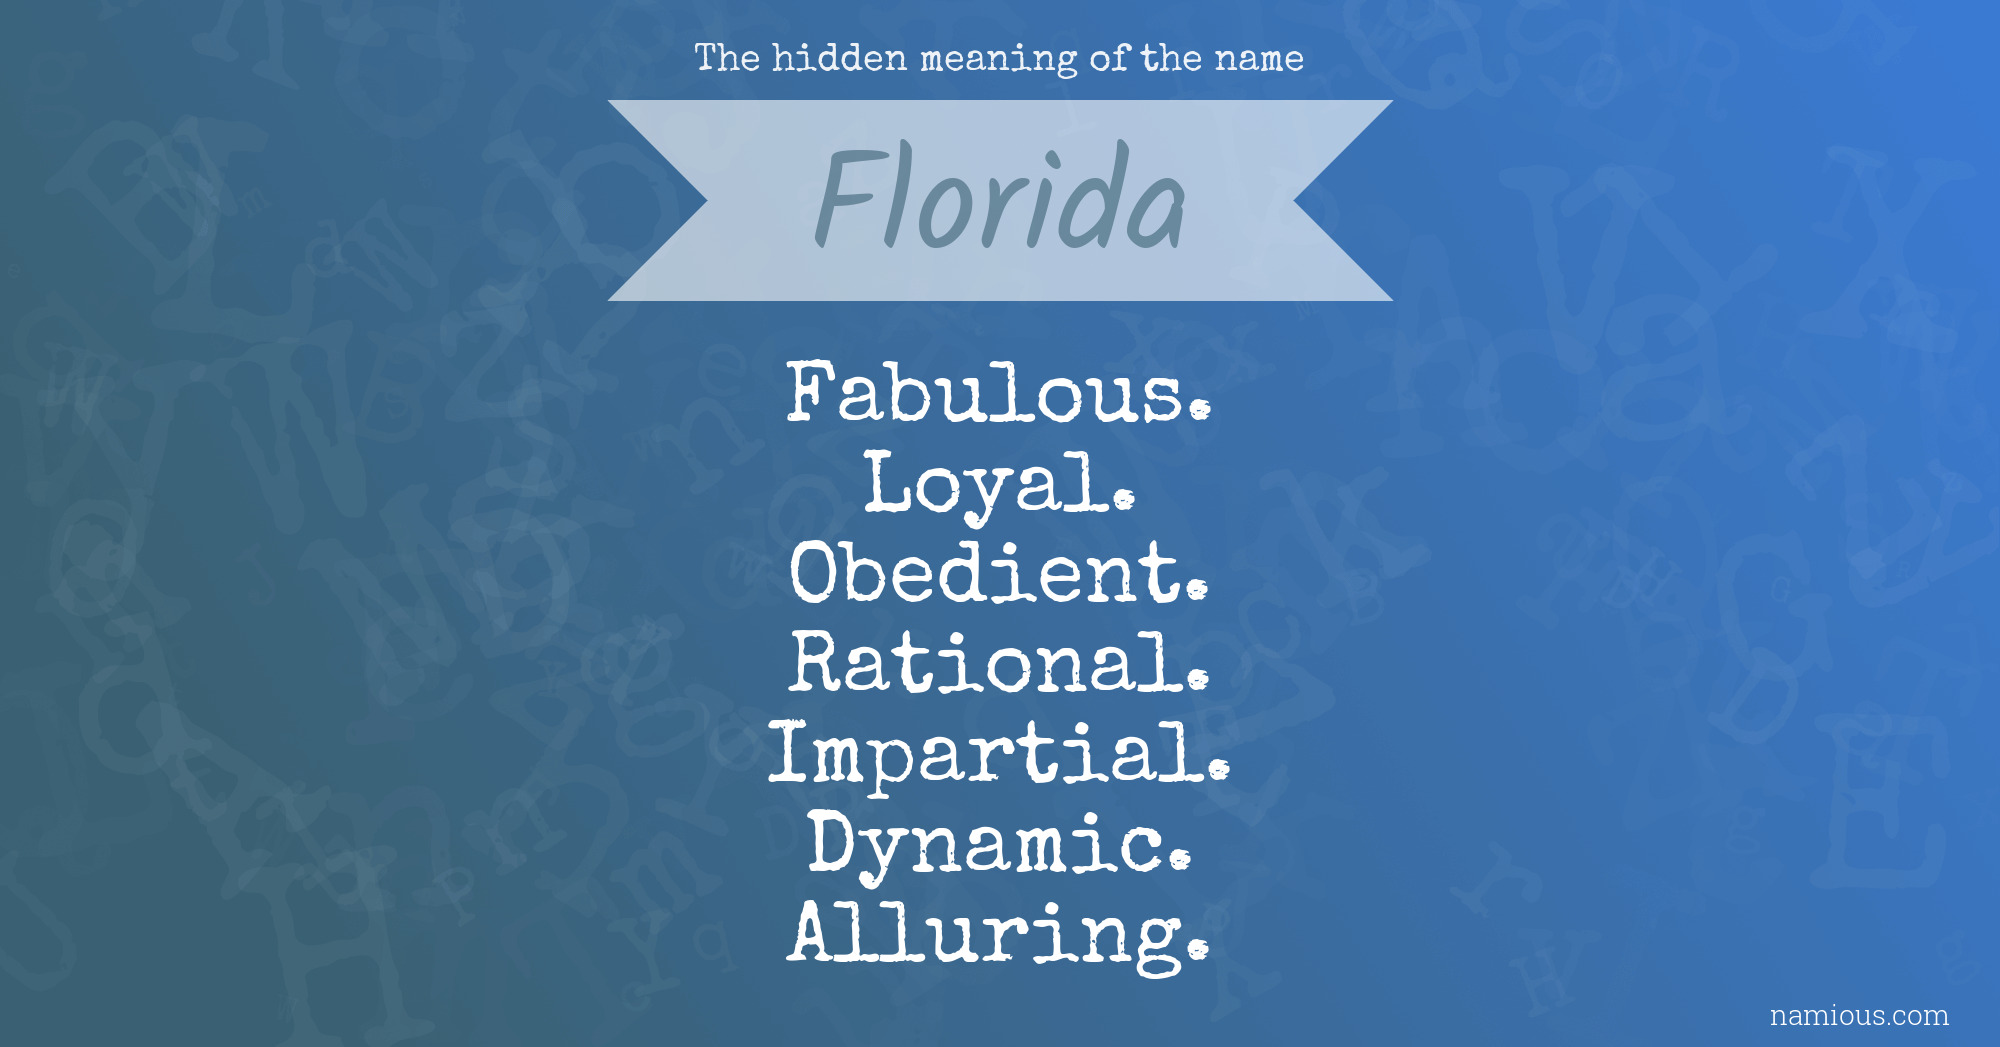 The hidden meaning of the name Florida